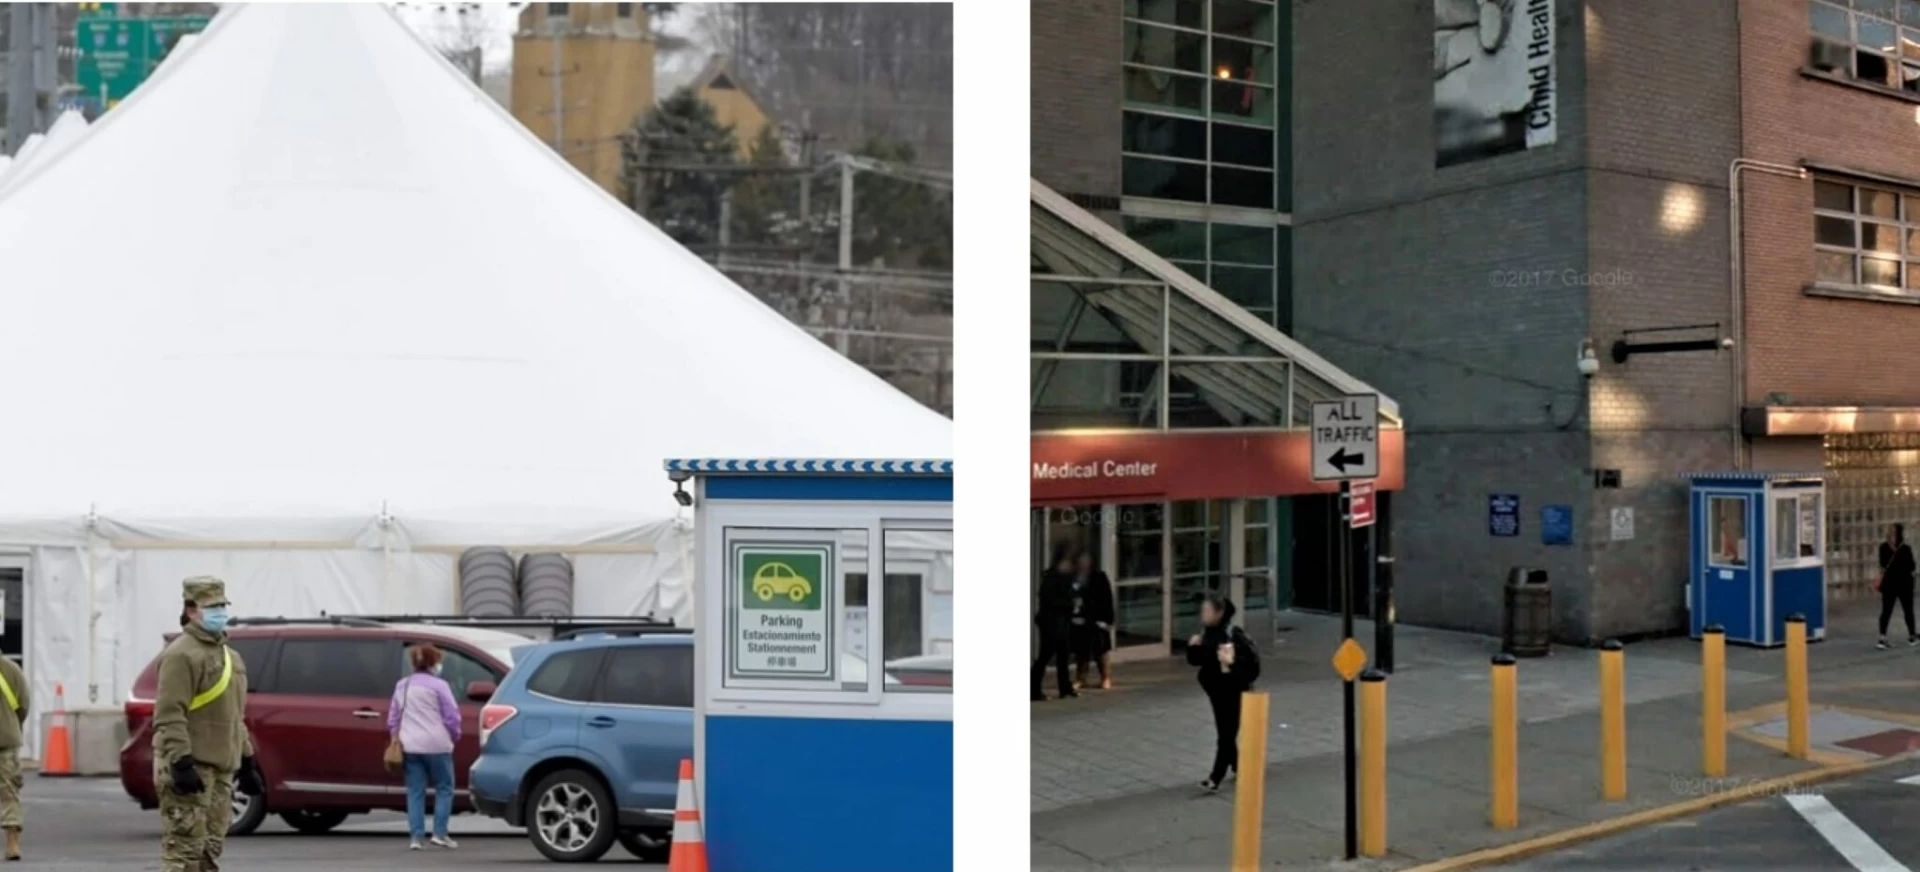 Booths and Kiosks for COVID-19 Testing